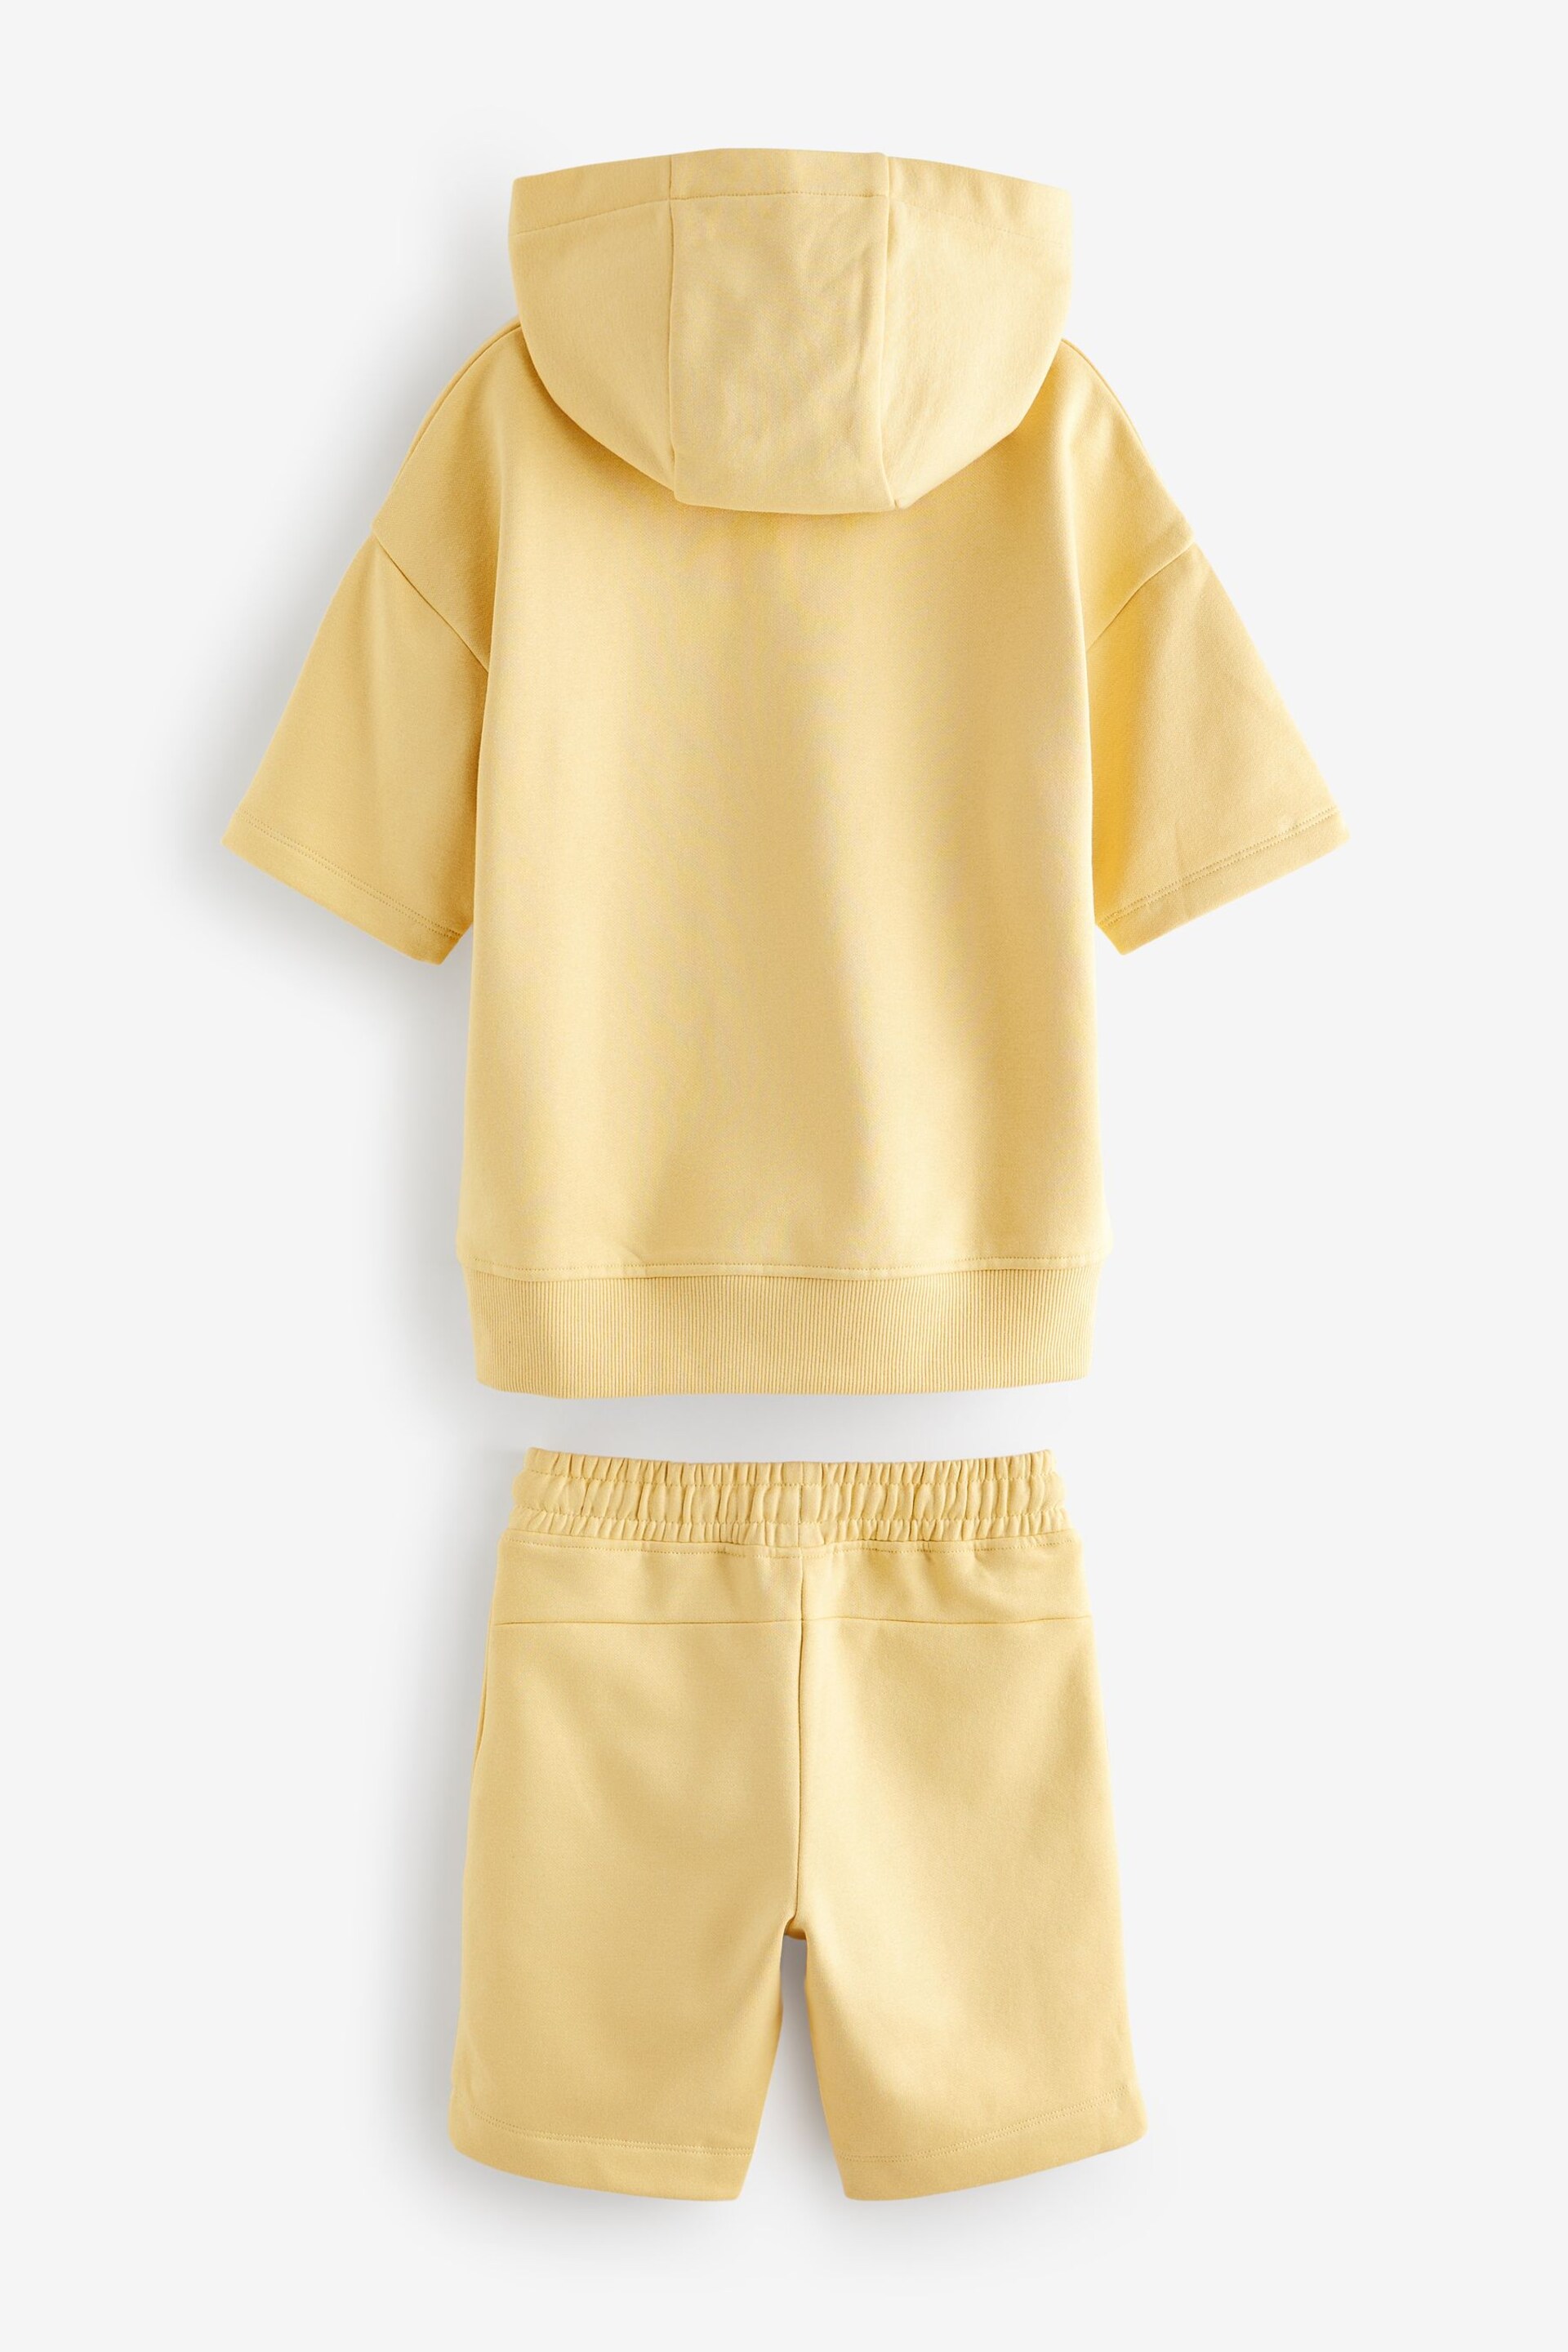 Buttermilk Yellow Short Sleeve Hoodie and Shorts Set (3-16yrs) - Image 5 of 6